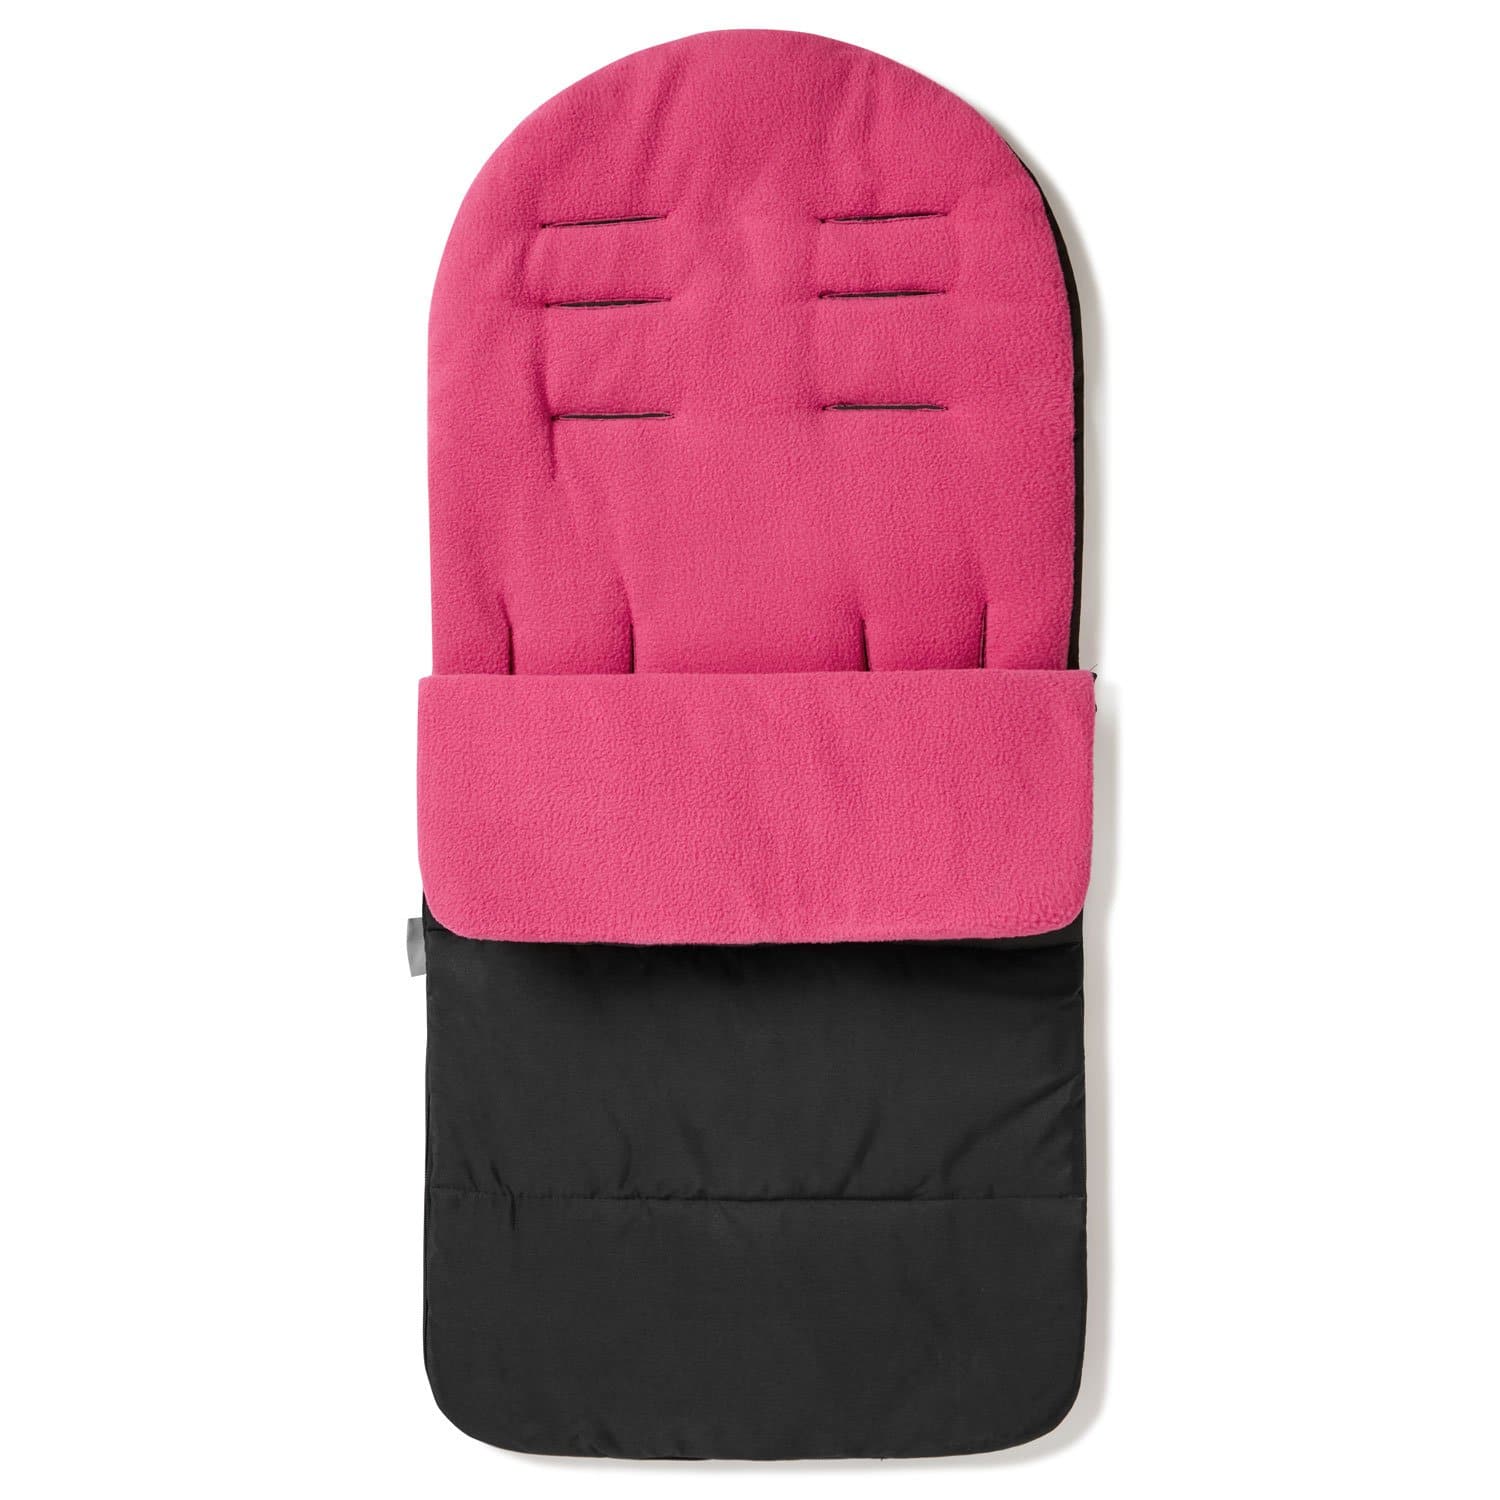 Premium Footmuff / Cosy Toes Compatible with Looping - For Your Little One